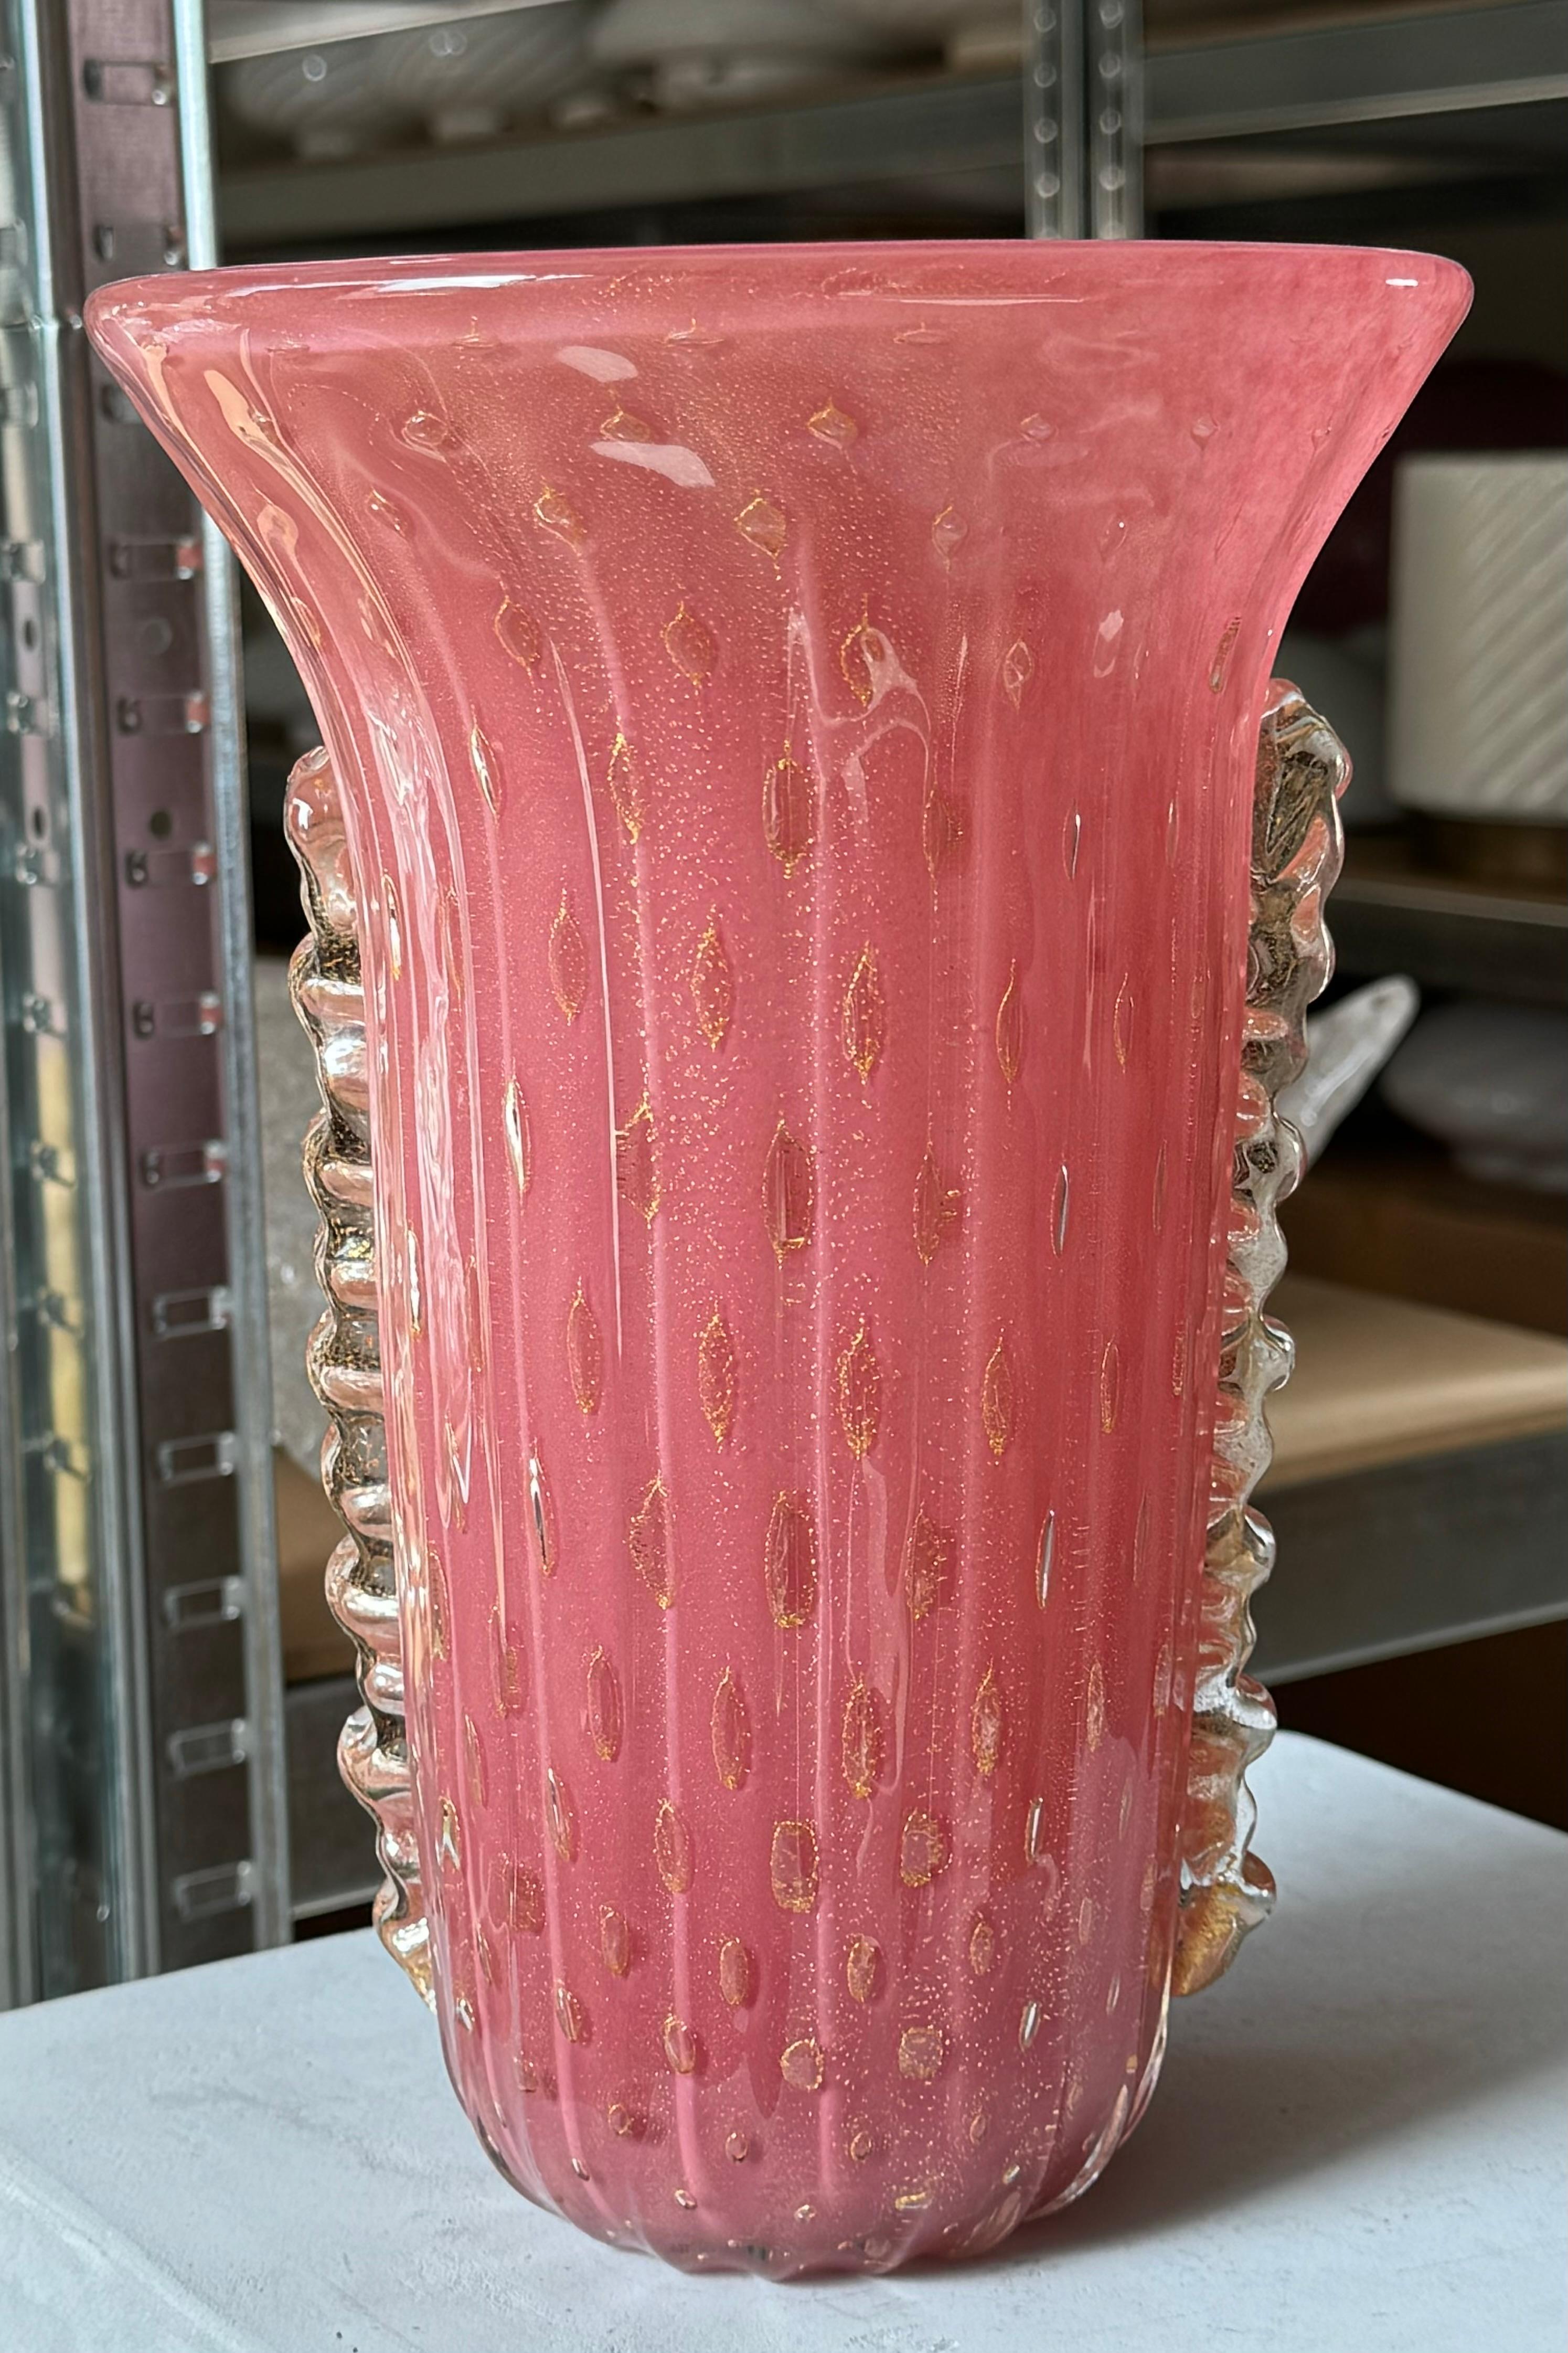 Large vintage Murano glass vase in a beautiful rose pink shade. Mouth-blown in a round shape with ornaments in crystal glass with gold leaf. Handmade in Italy, 1990s. Signed Cose belle rare, Made in Italy, Murano glass.
H: 25 cm. D: 16.5 cm